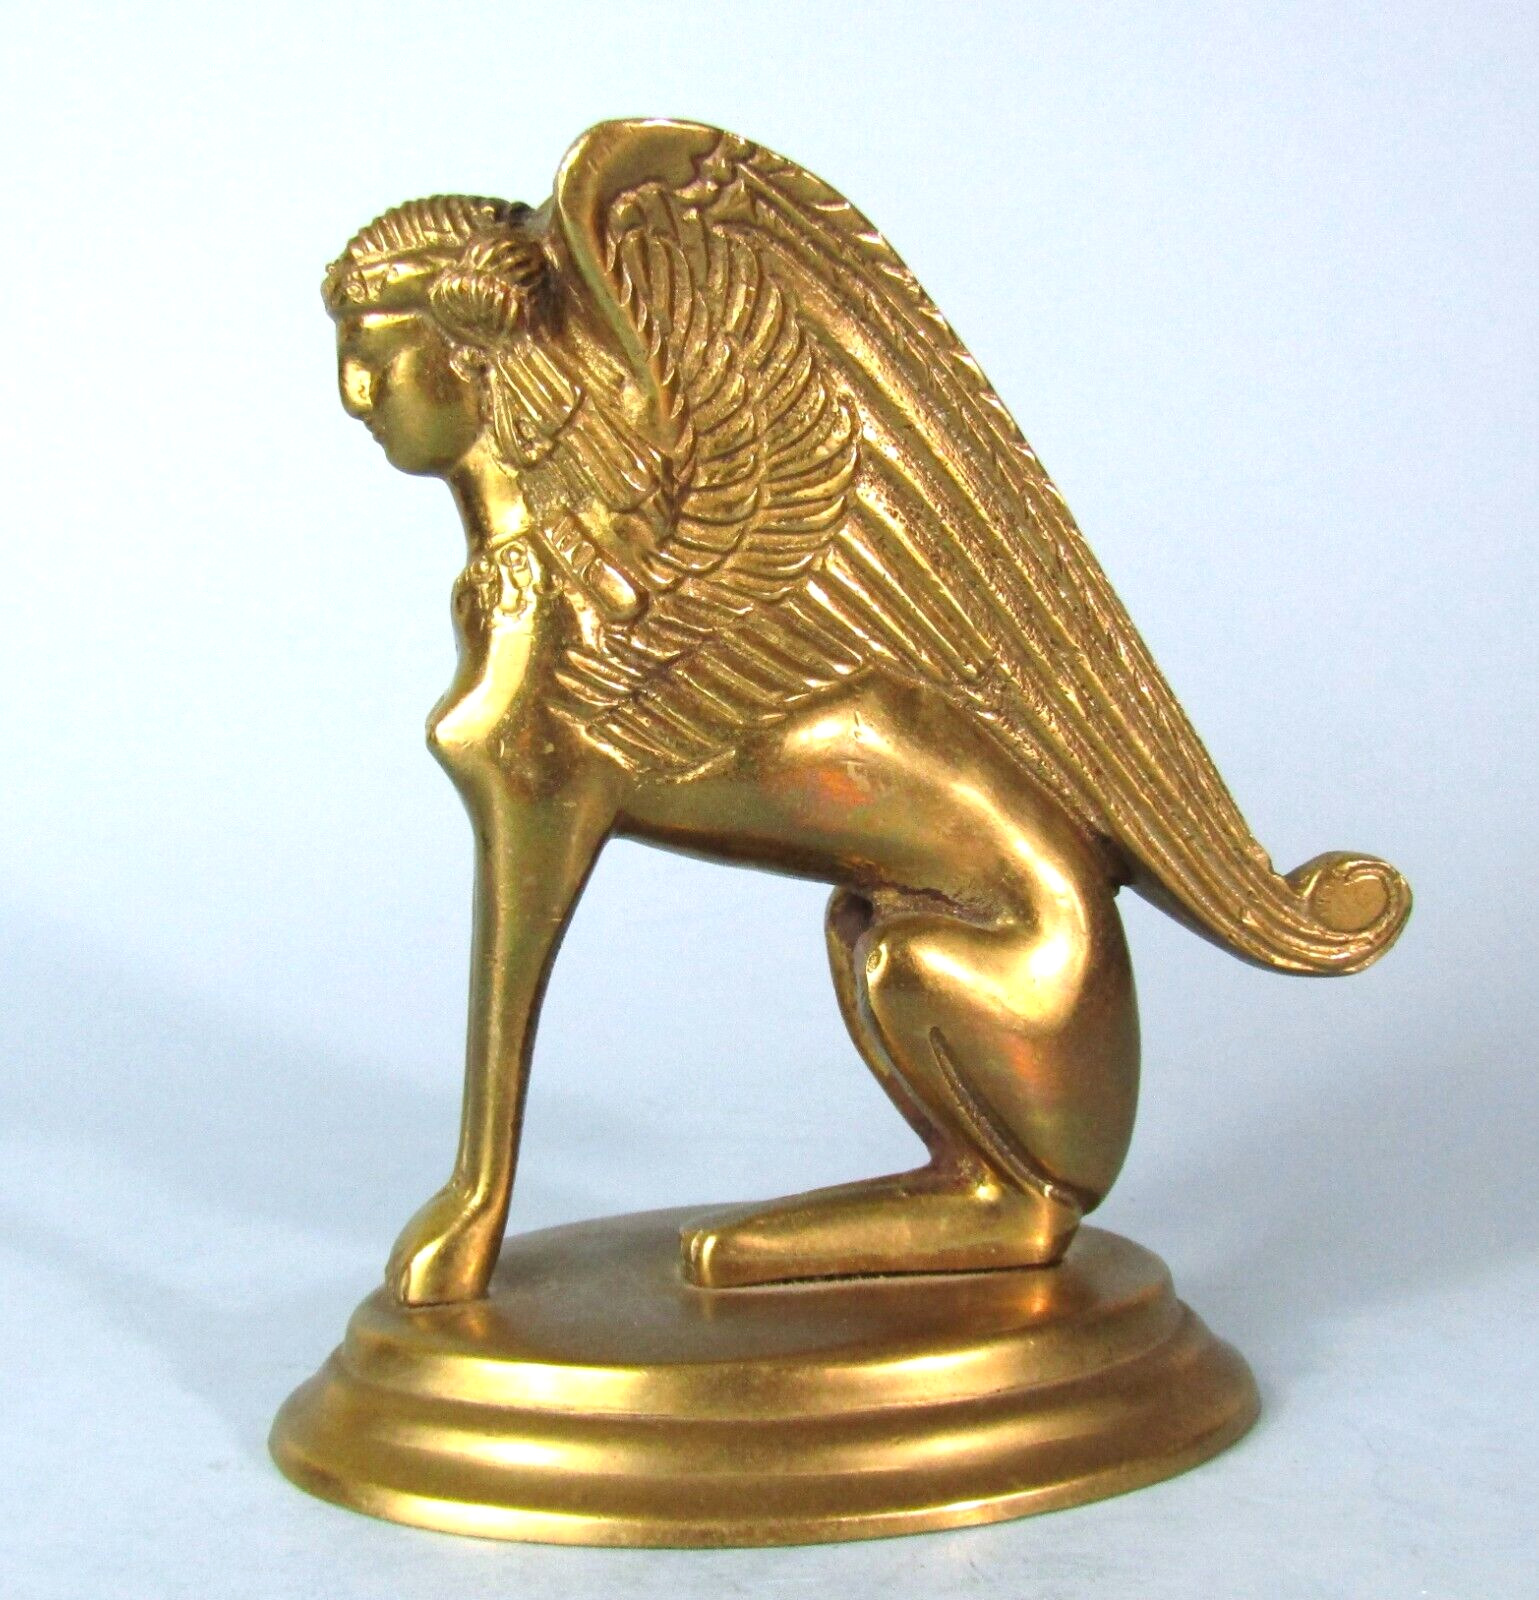 ANCIENT GREEK WINGED SPHINX STATUE SOLID BRASS MYTHICAL FIGURINE SCULPTURE